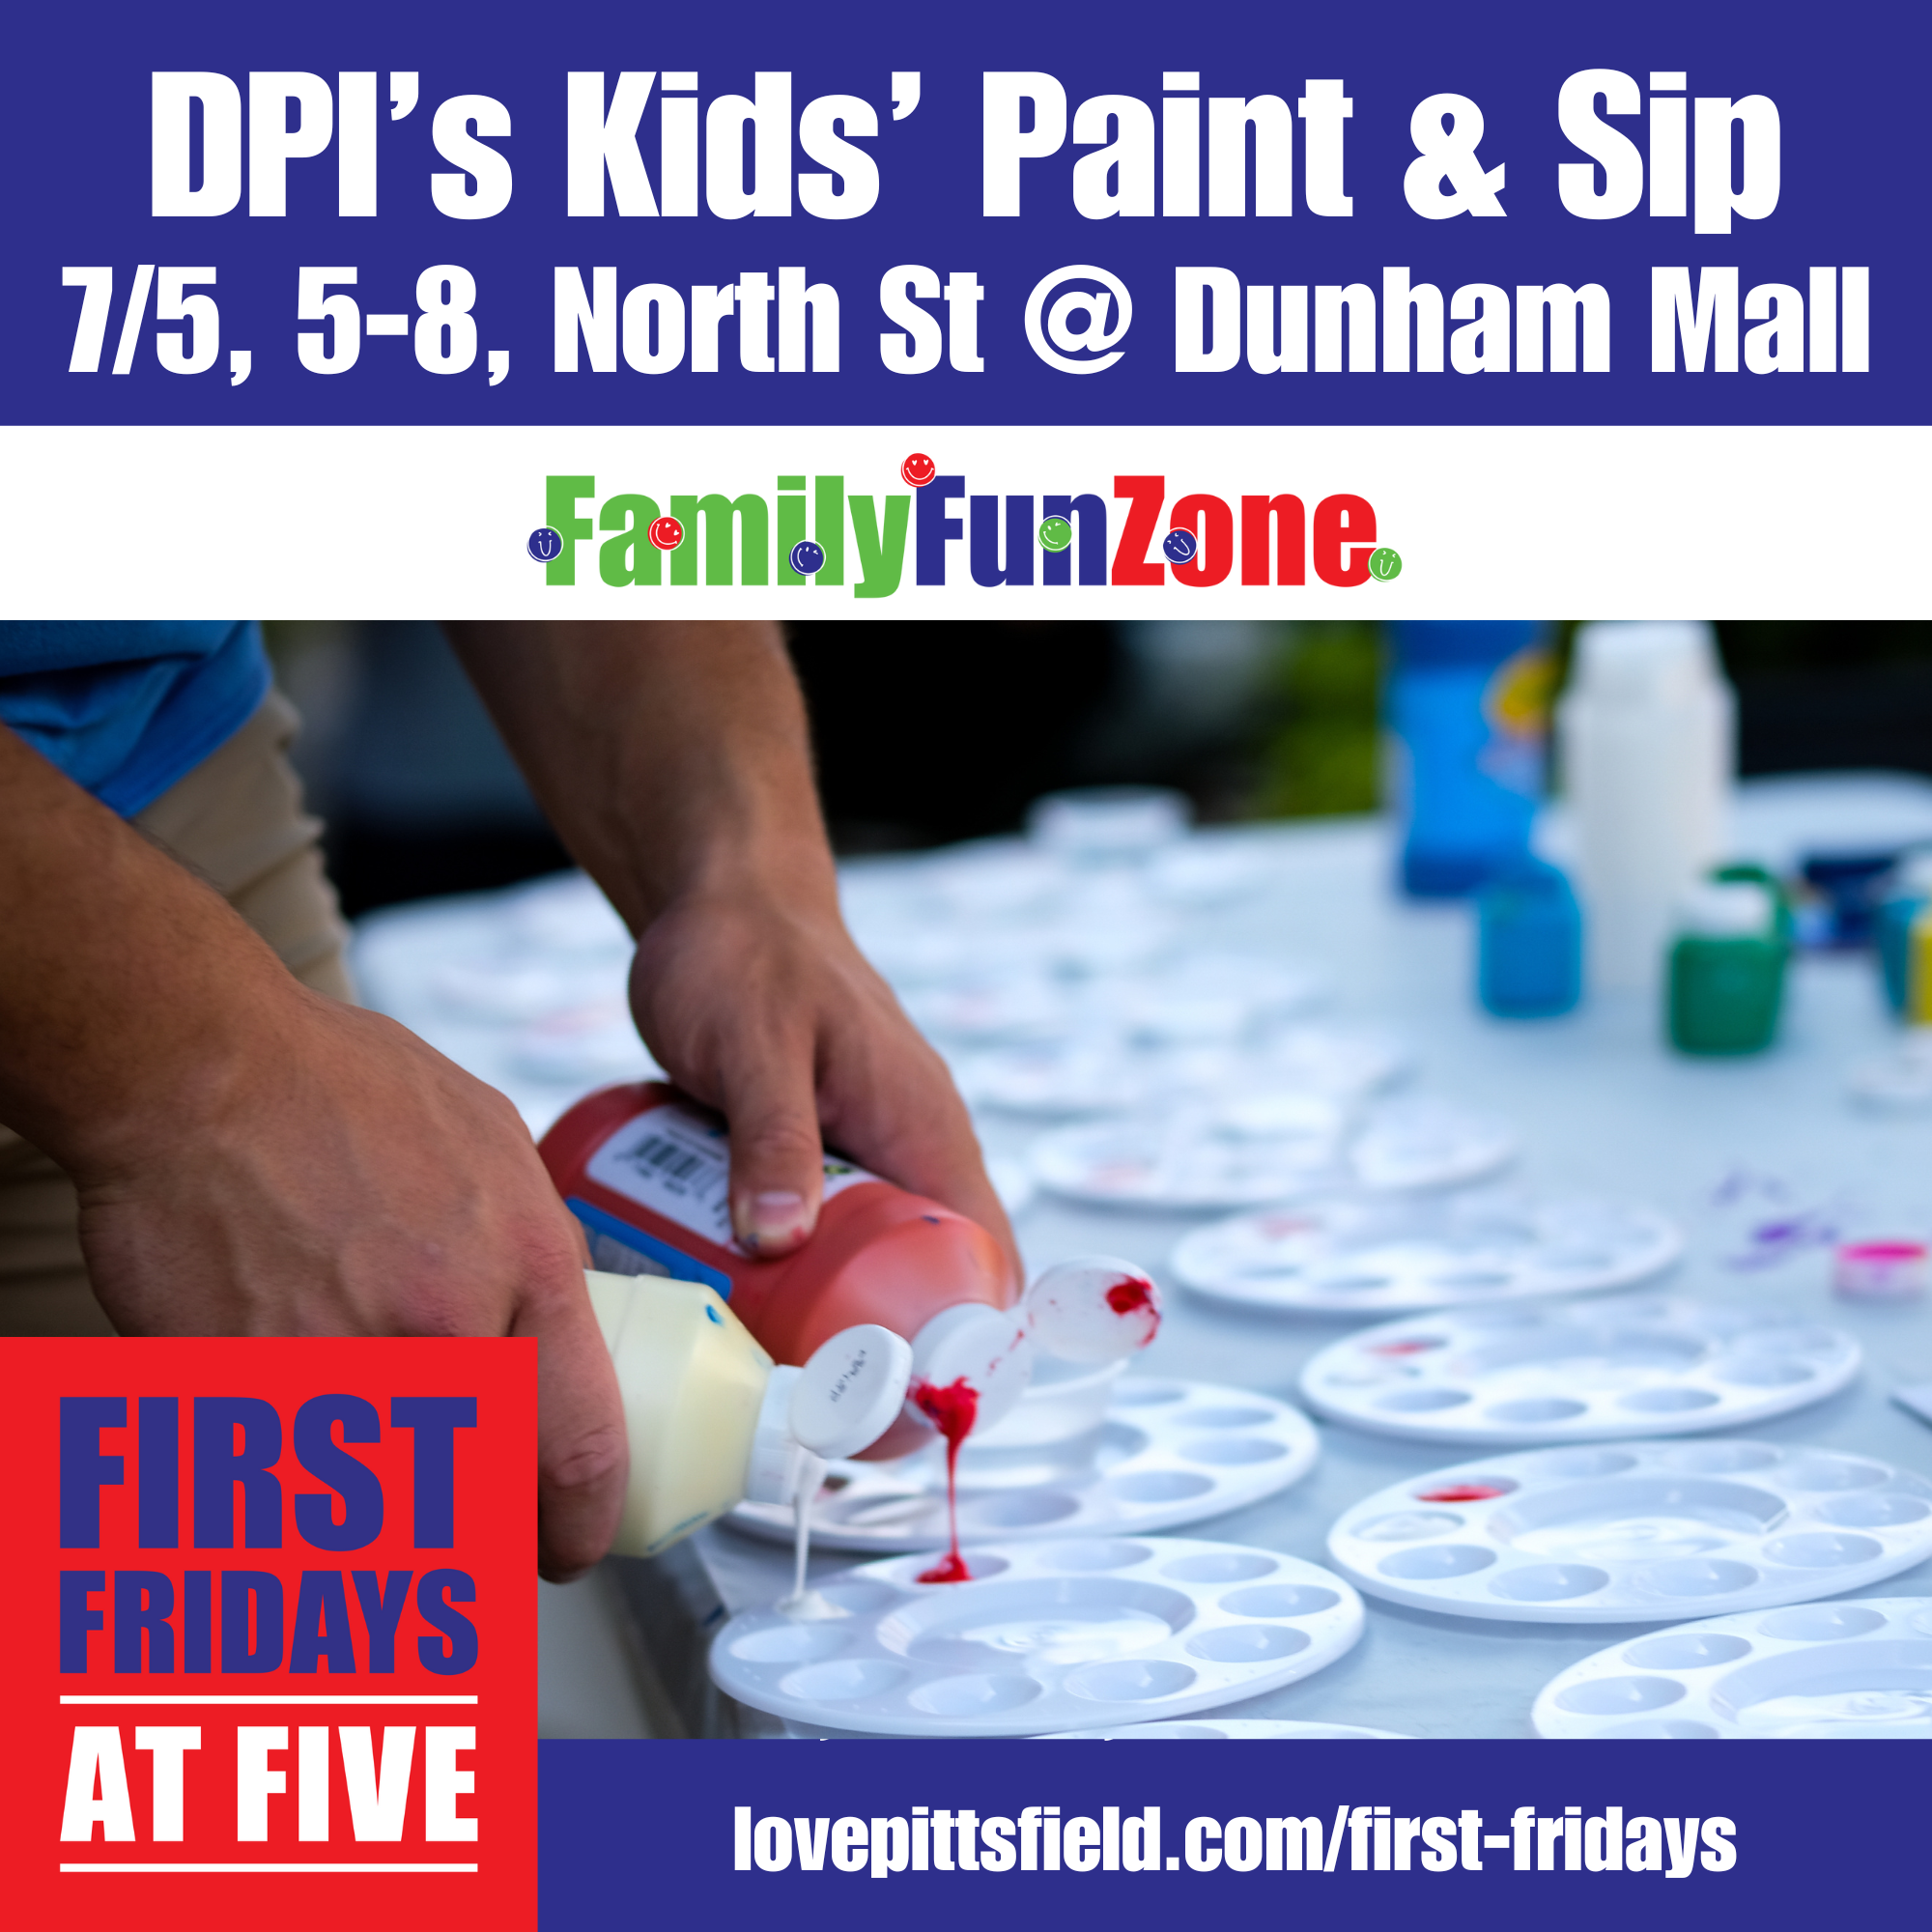 Free Kids’ Paint & Sip at First Fridays at Five!